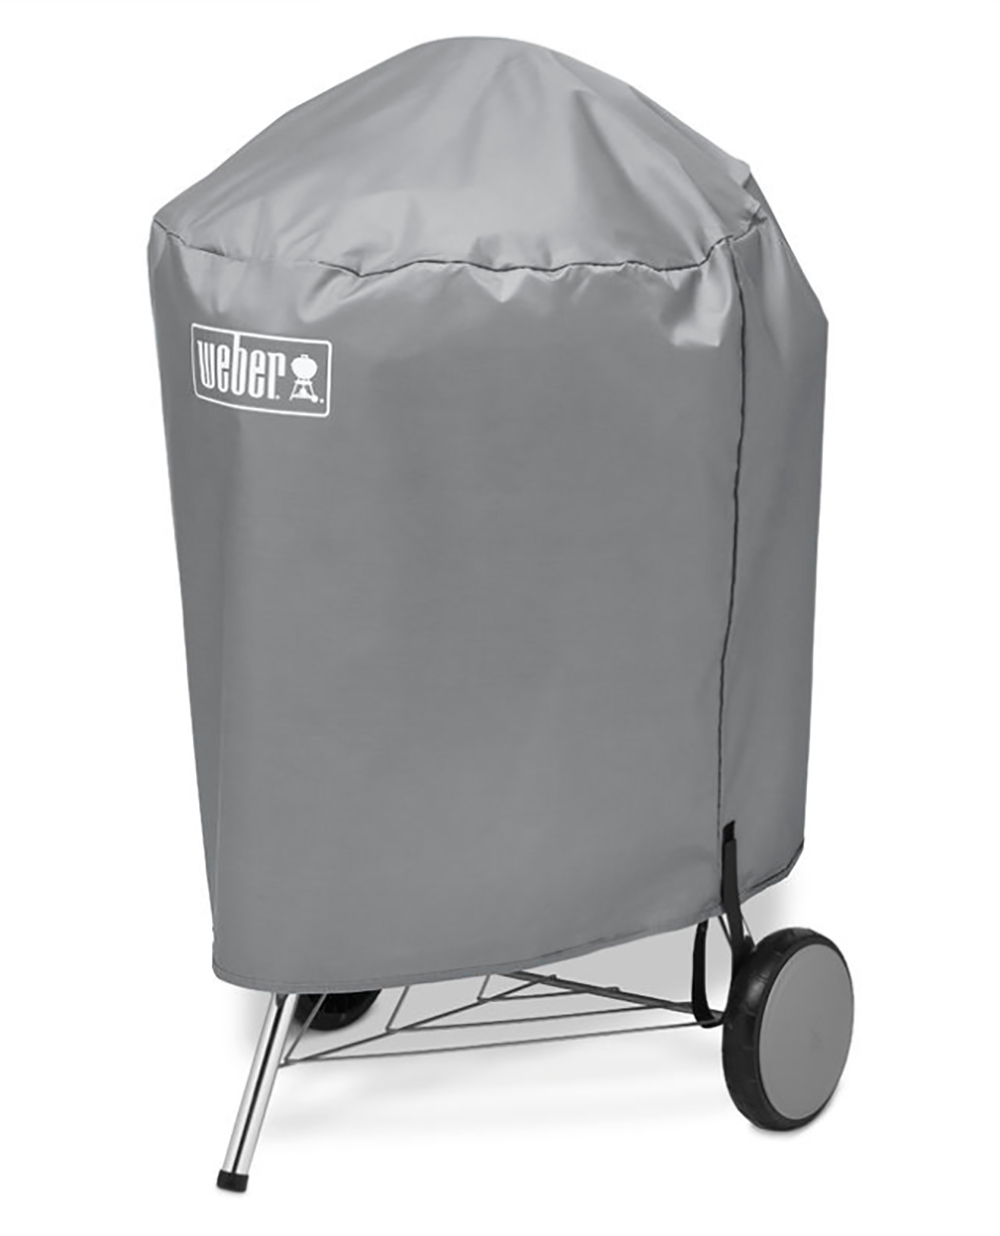 Weber Barbecue Cover Fits 57cm charcoal barbecues 7176